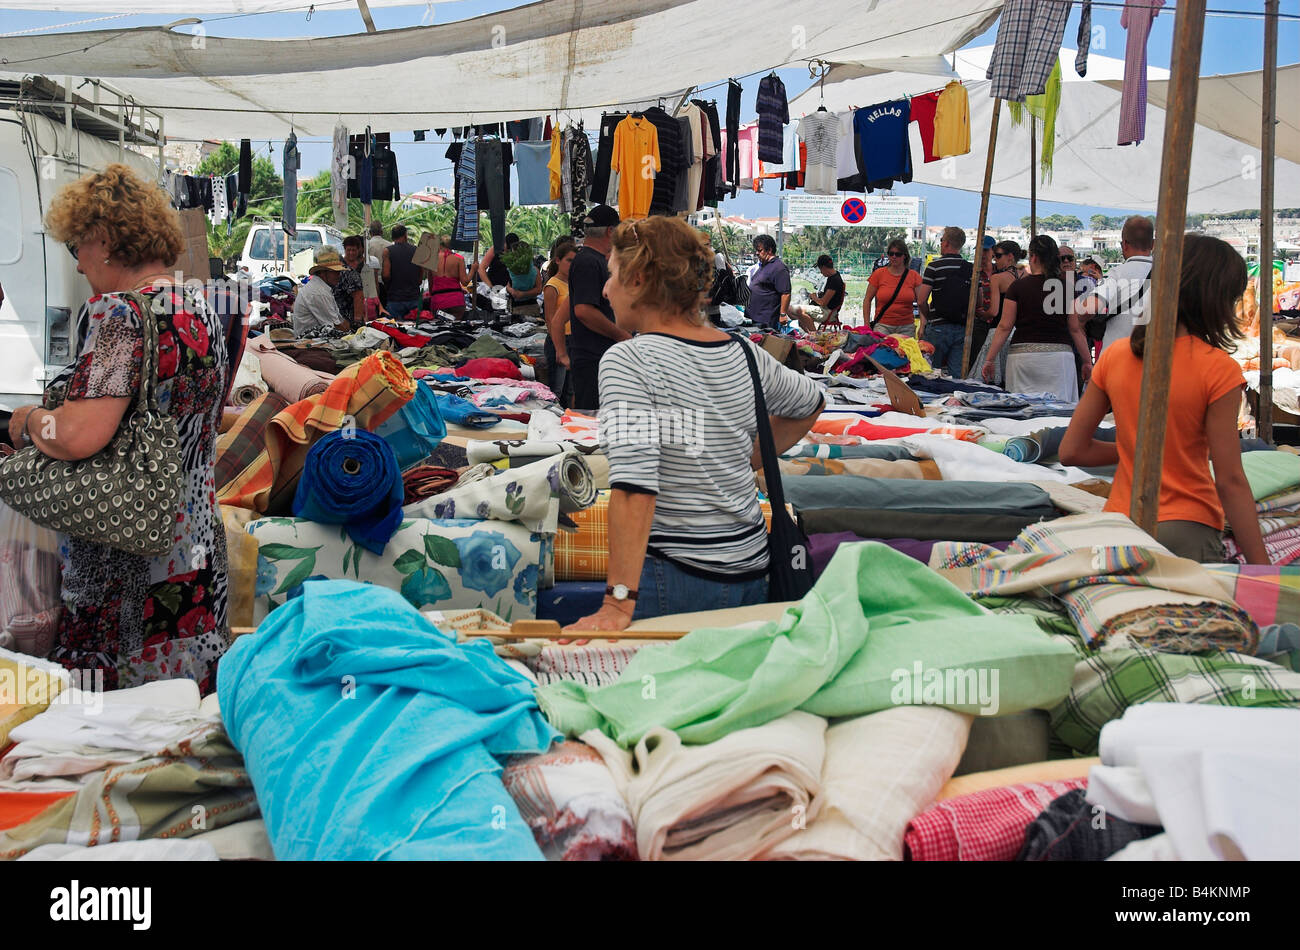 Clothing stall in market in Rethymnon Crete Greece Stock Photo